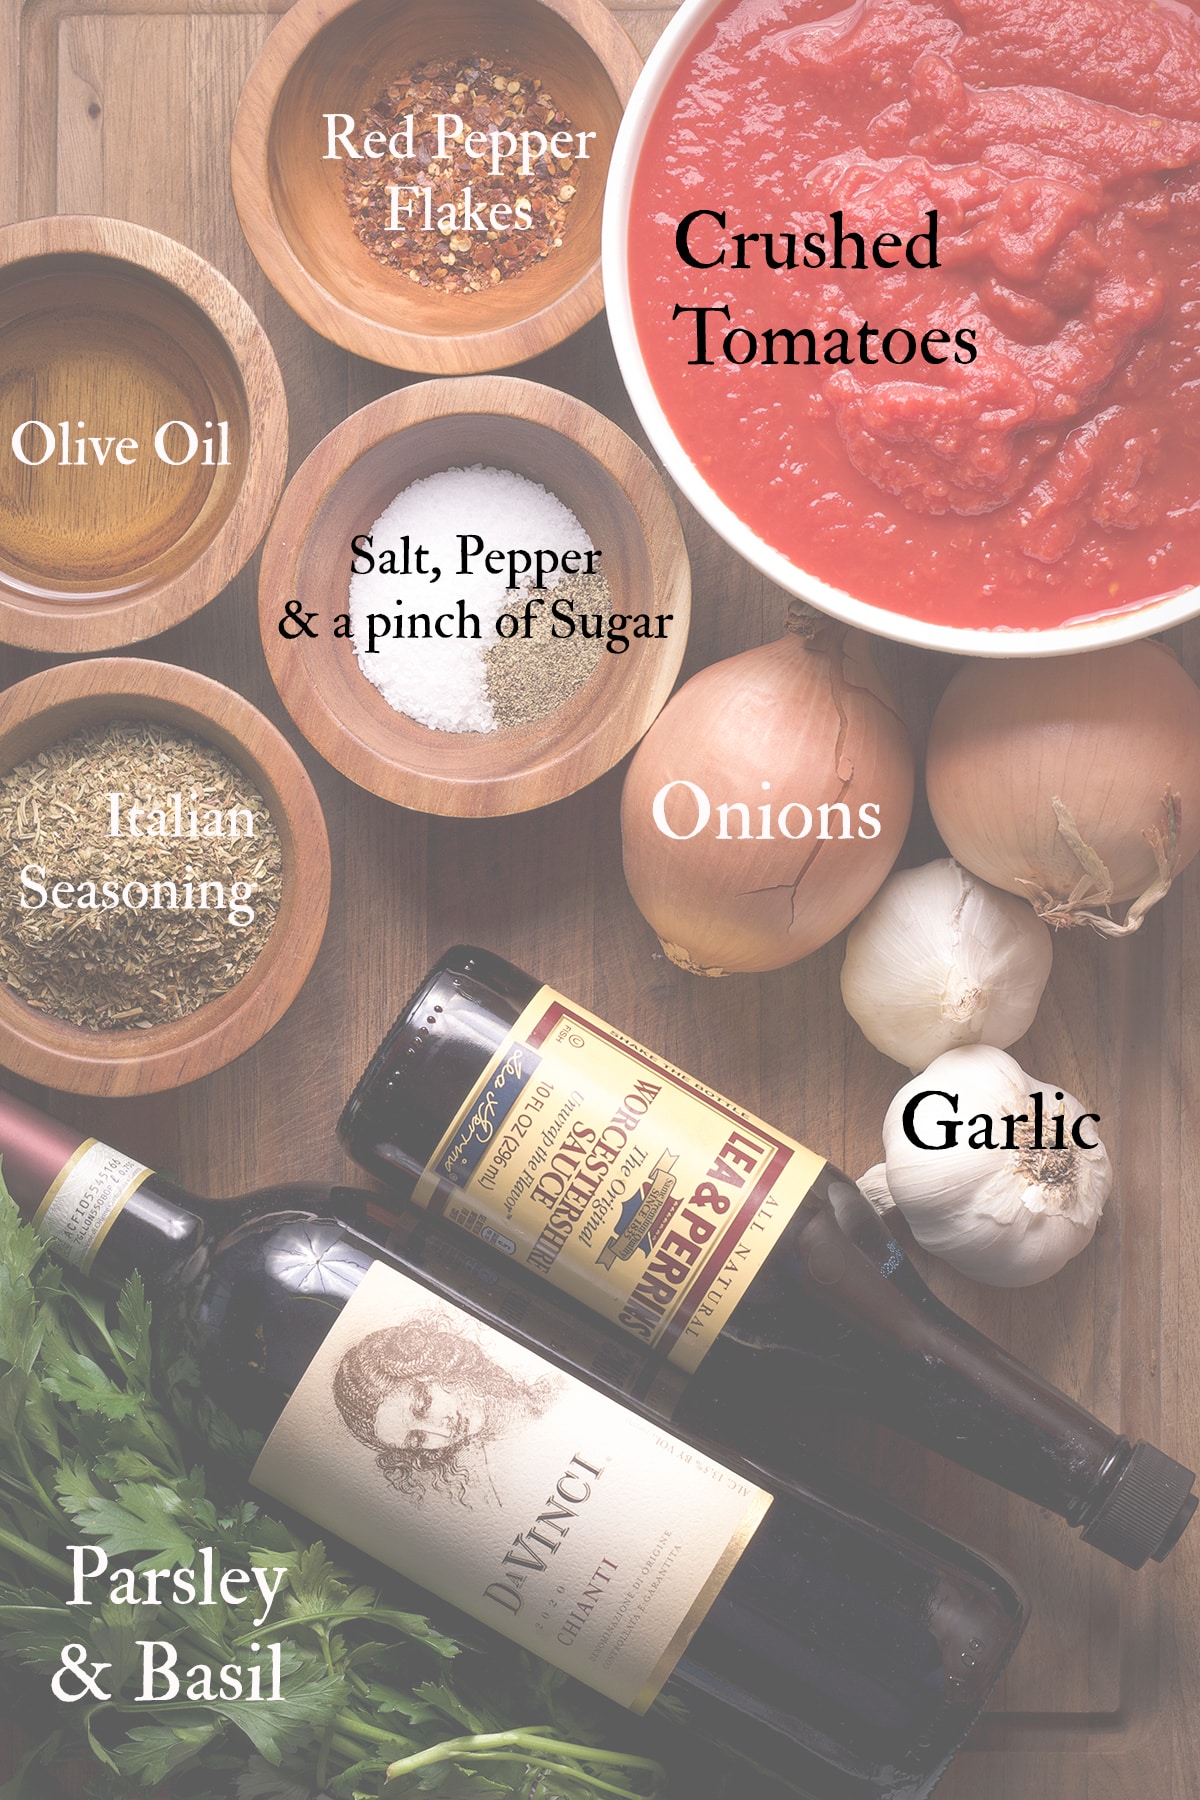 All of the ingredients needed to make this homemade marinara sauce recipe.